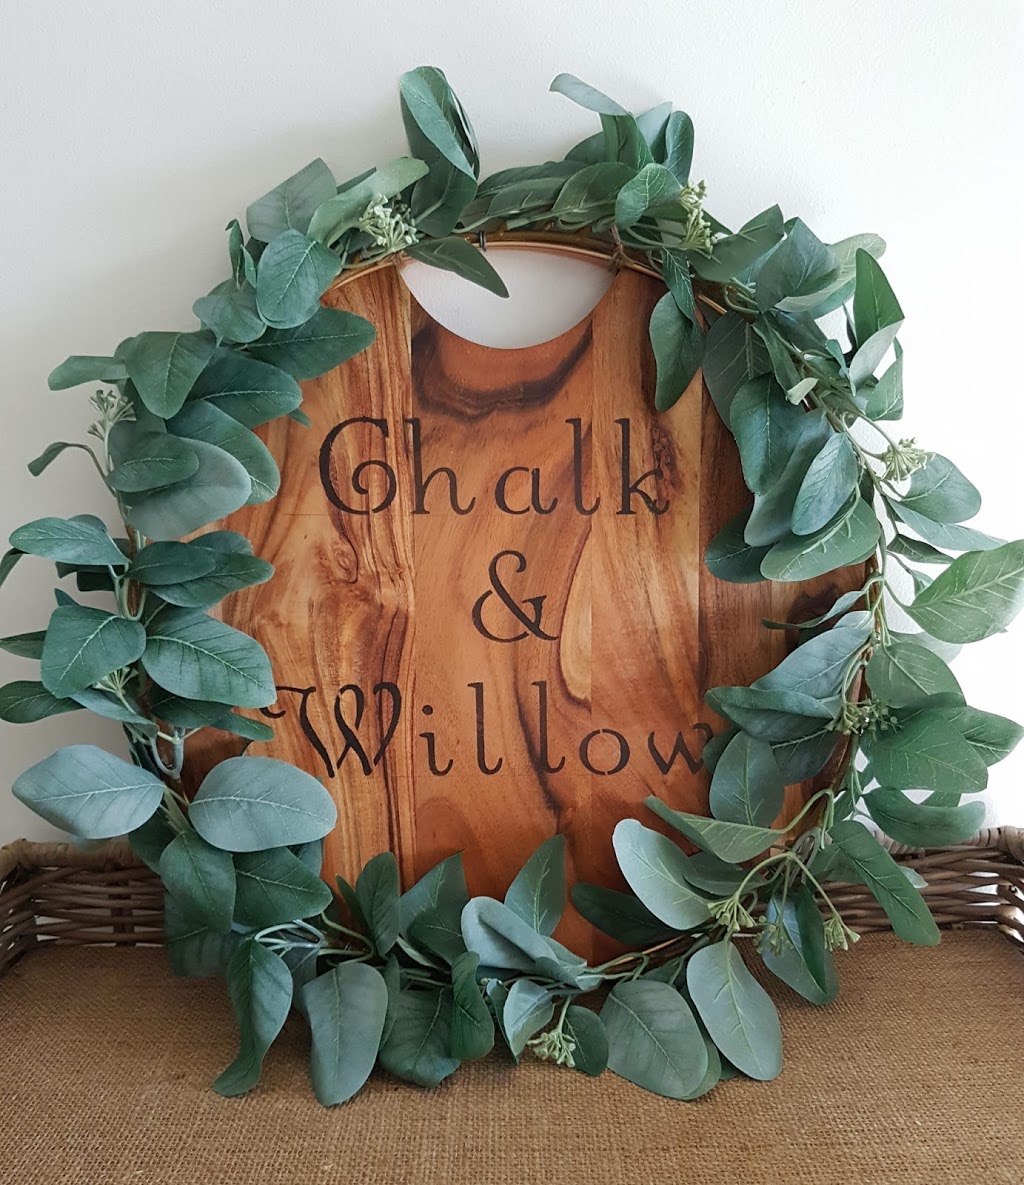 Chalk and Willow | 8 Echo Pl, One Mile NSW 2316, Australia | Phone: 0423 530 022